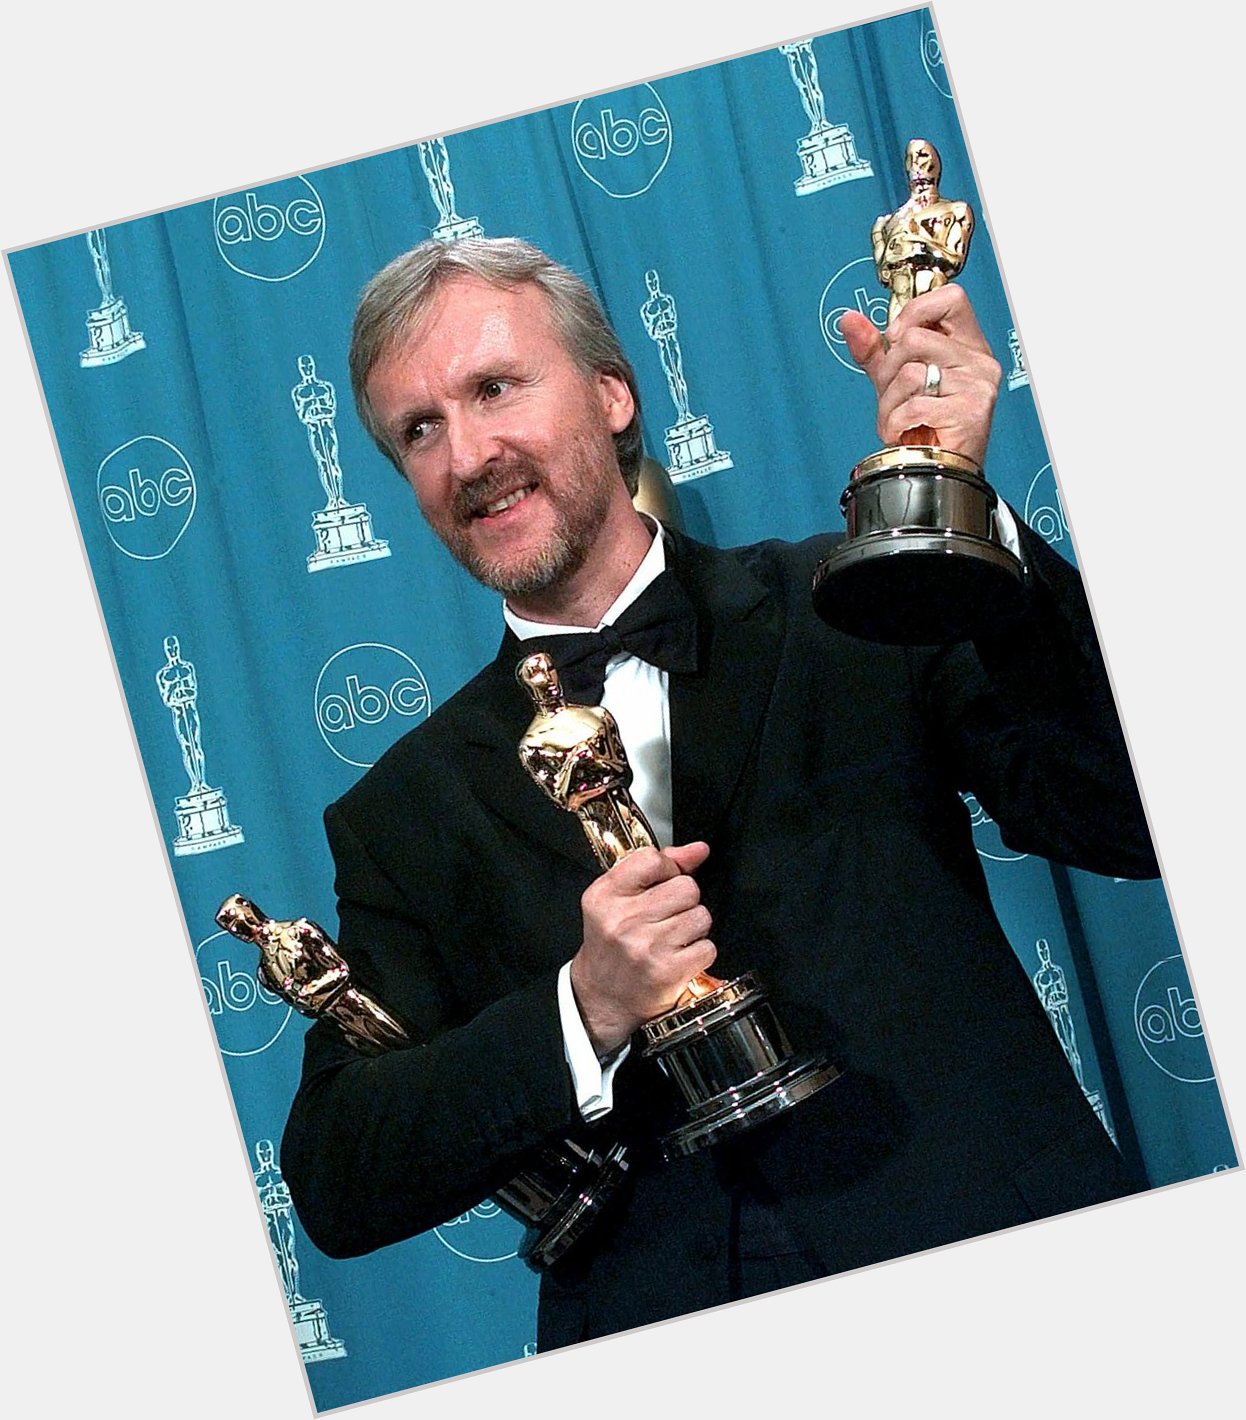 Happy Birthday to James Cameron, who turns 61 today! 